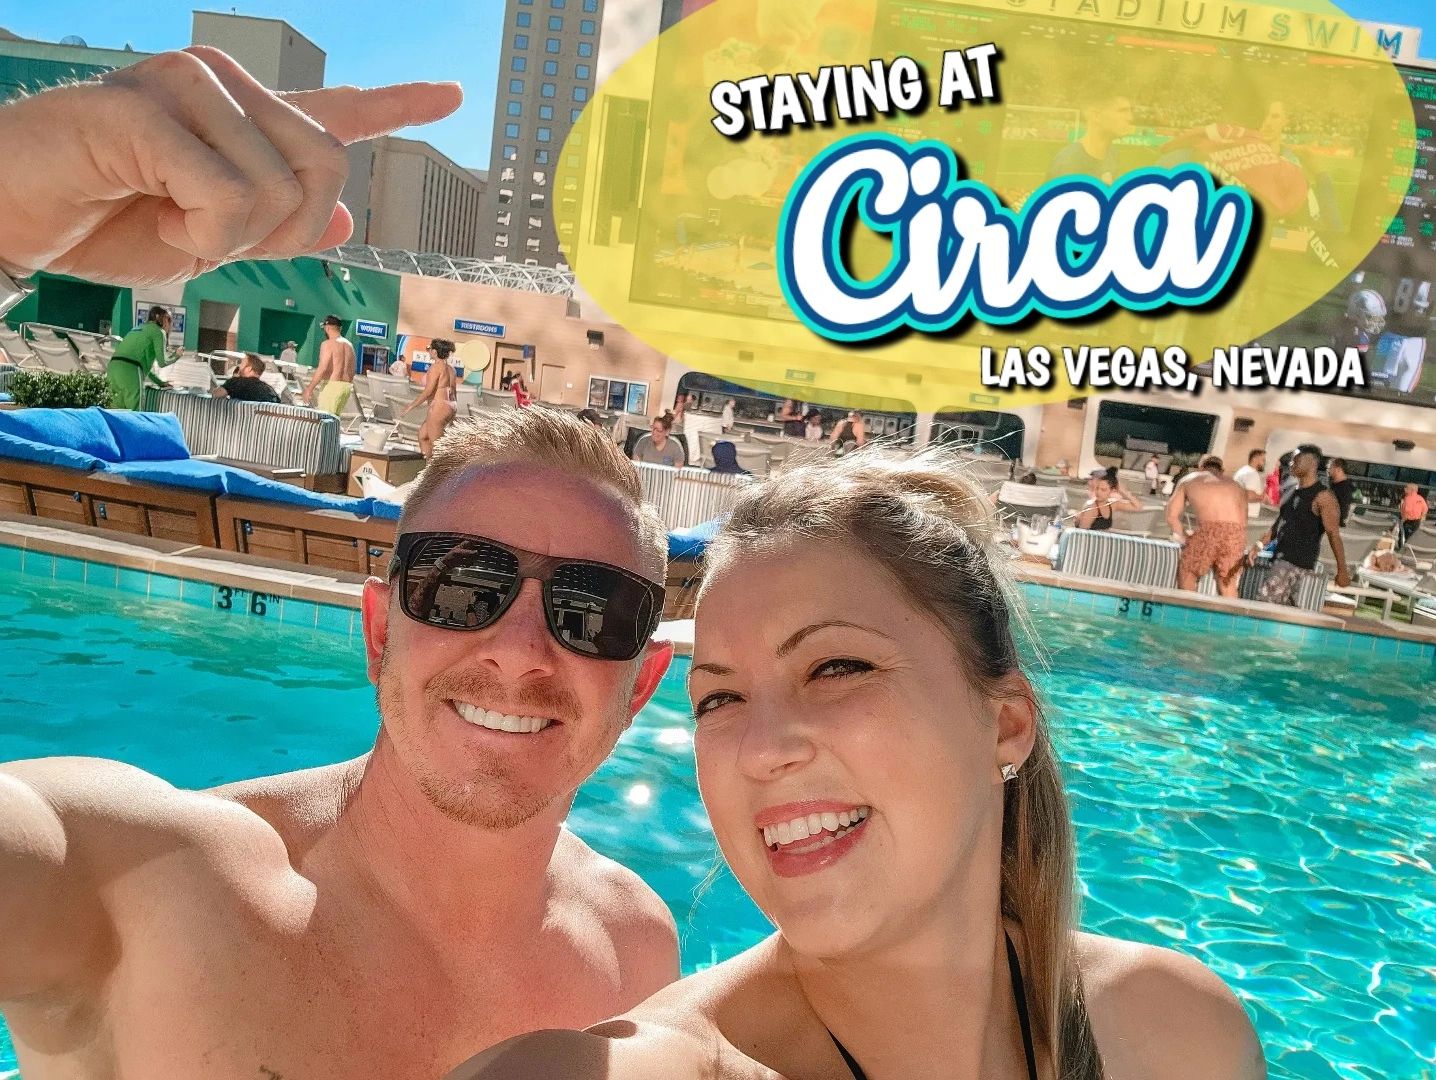 man and woman smiling while sitting in a pool at Circa Las Vegas